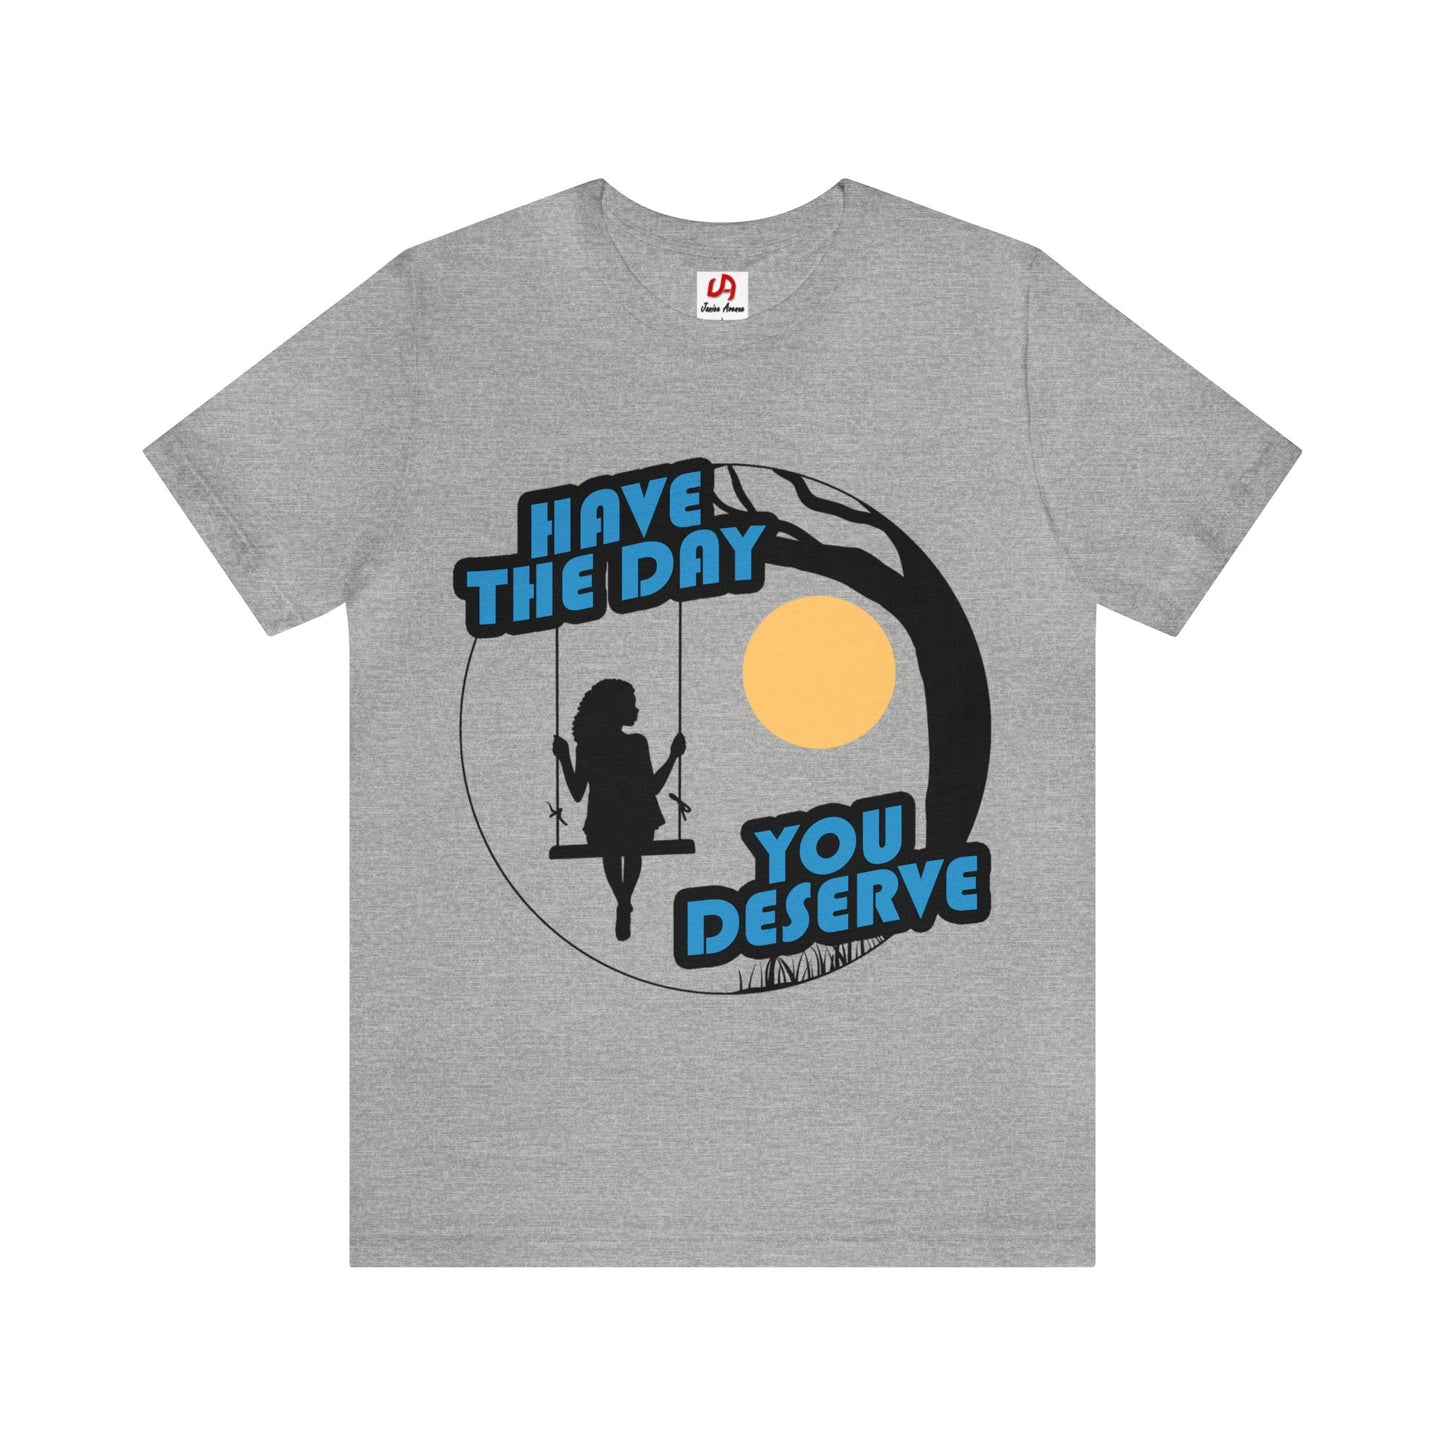 Have The Day You Deserve Shirt - Black Text